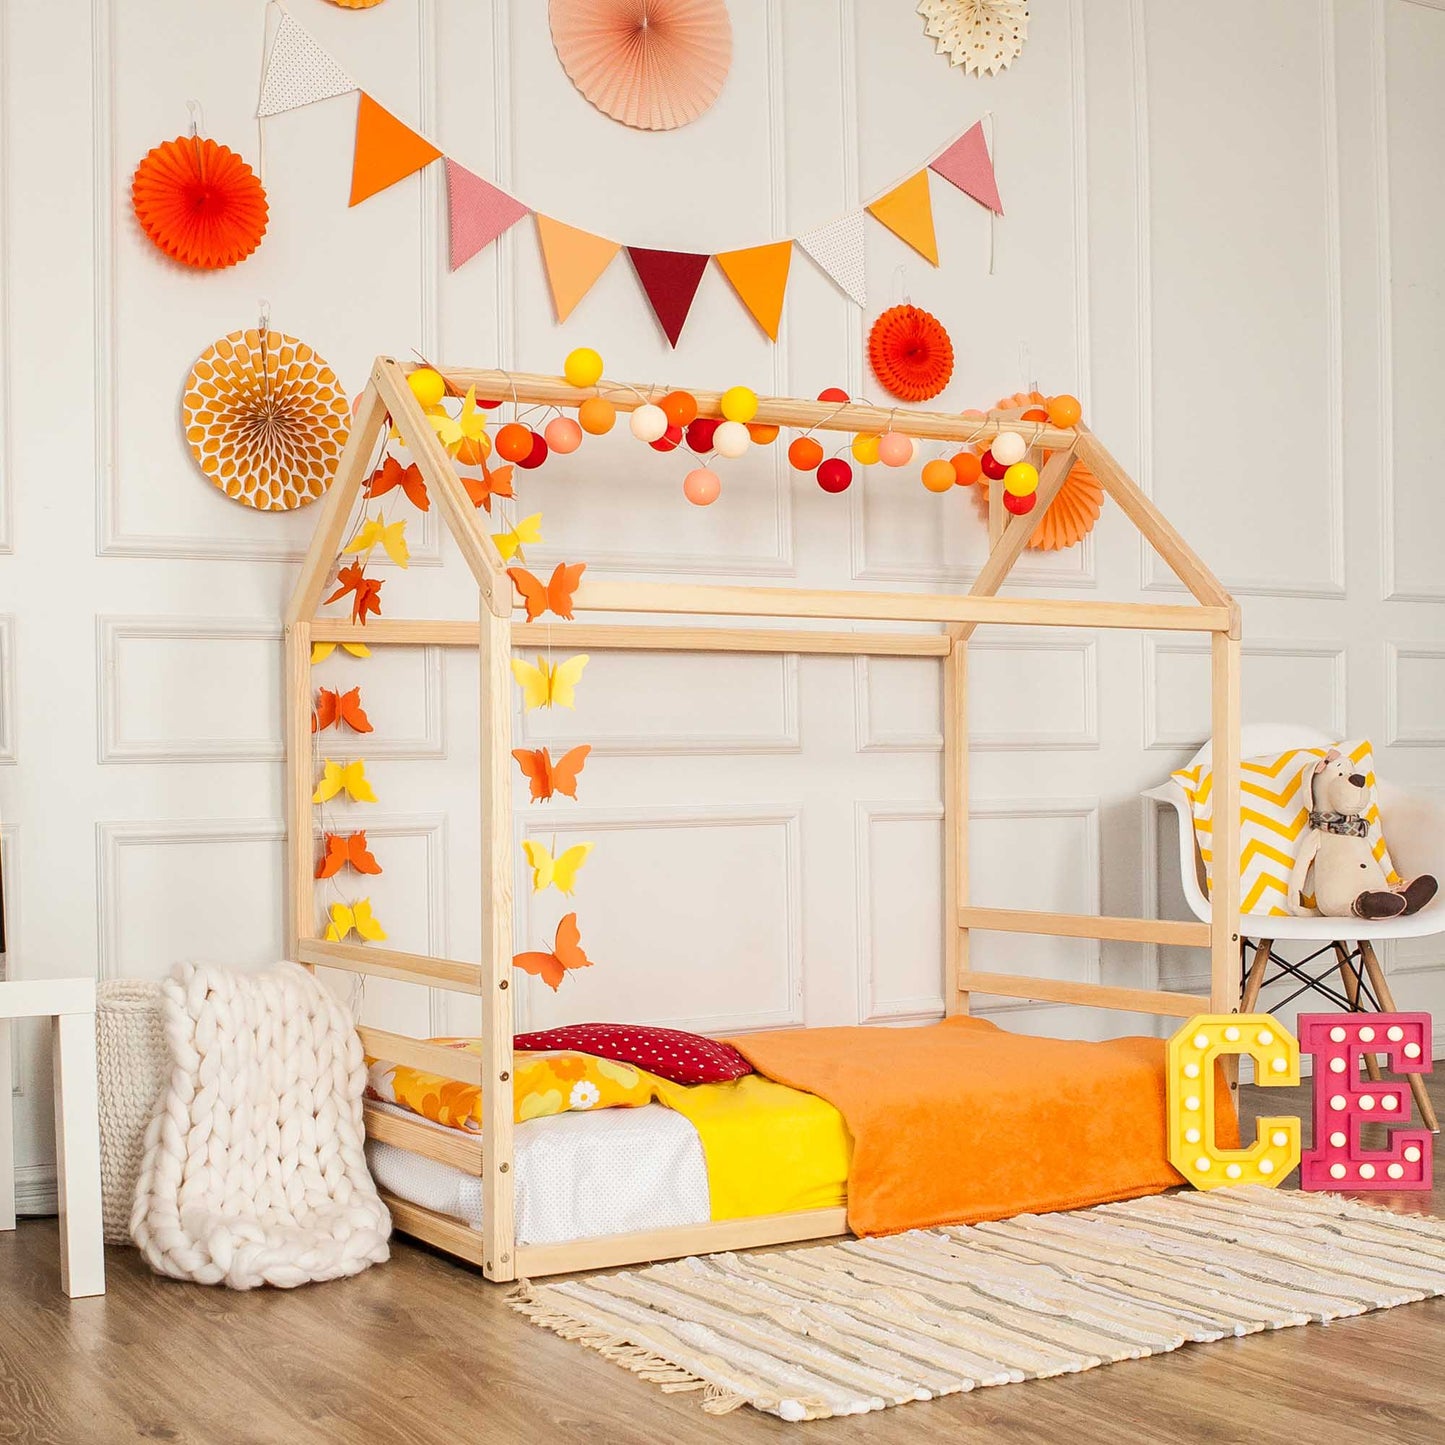 A child's room with a Floor house-frame bed with a horizontal headboard and footboard.